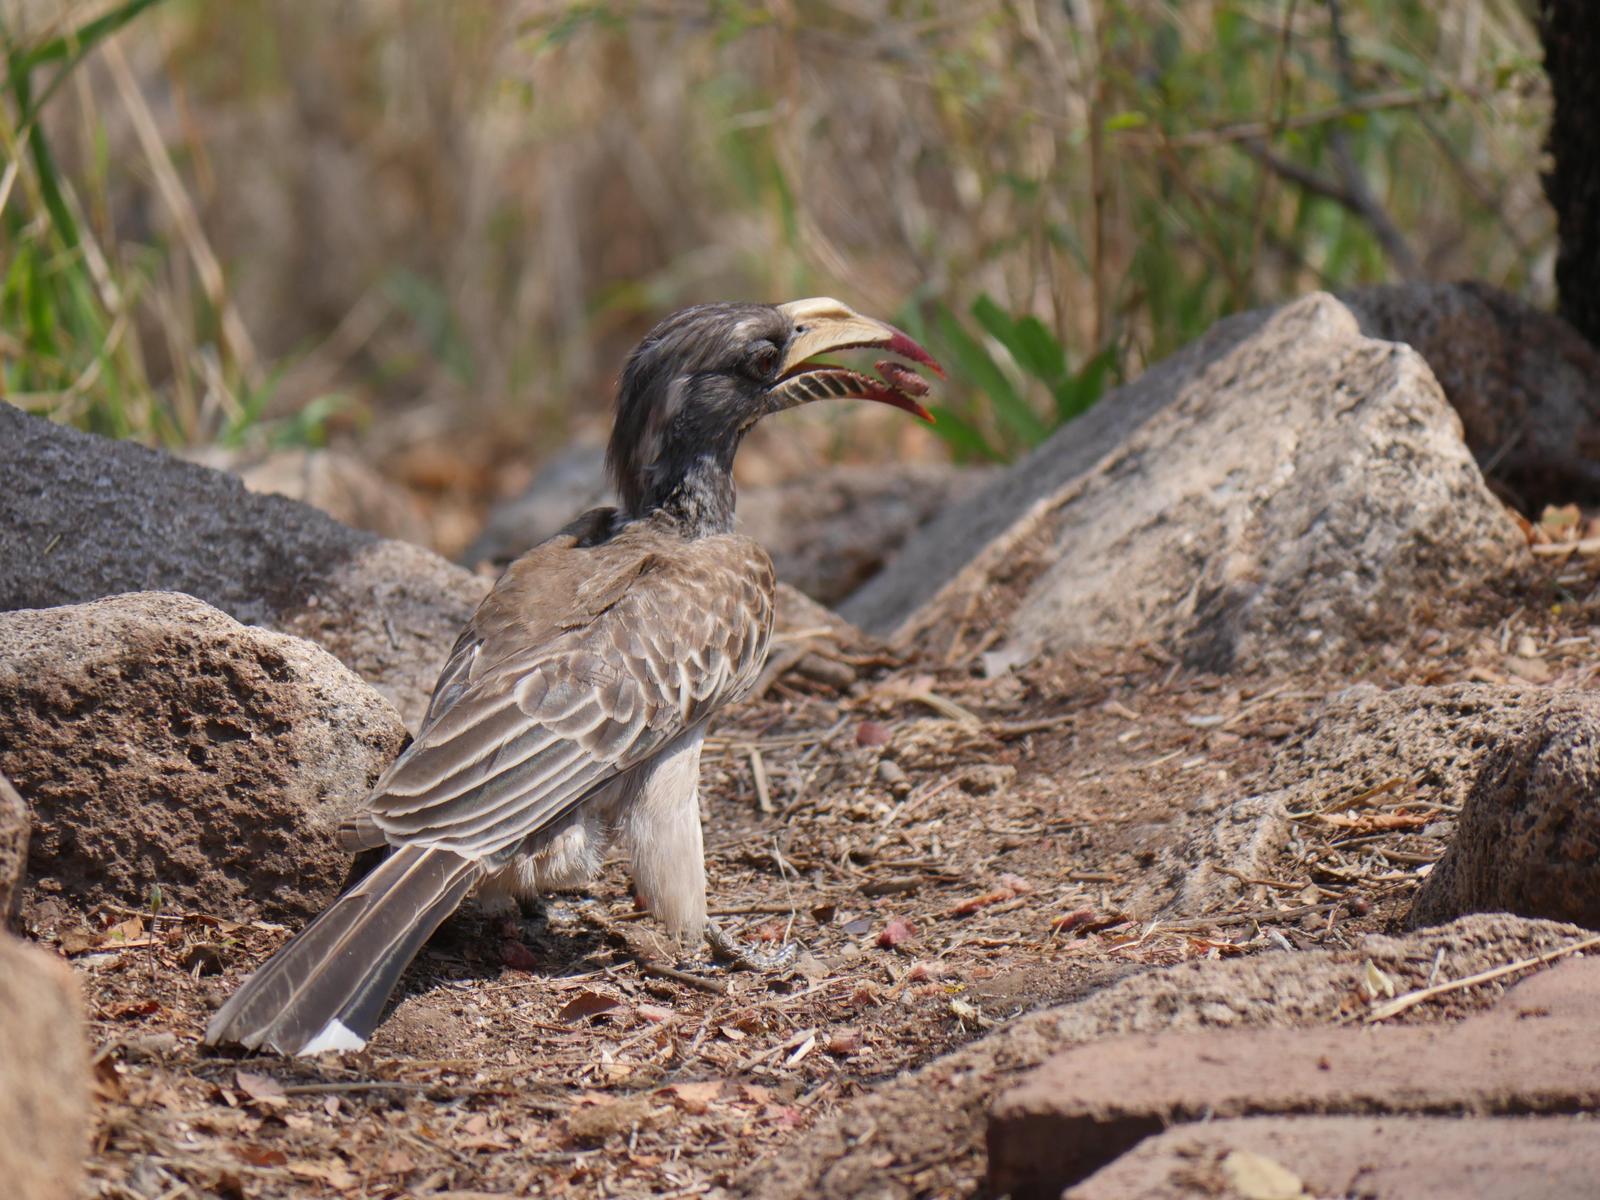 African Gray Hornbill Photo by Peter Lowe